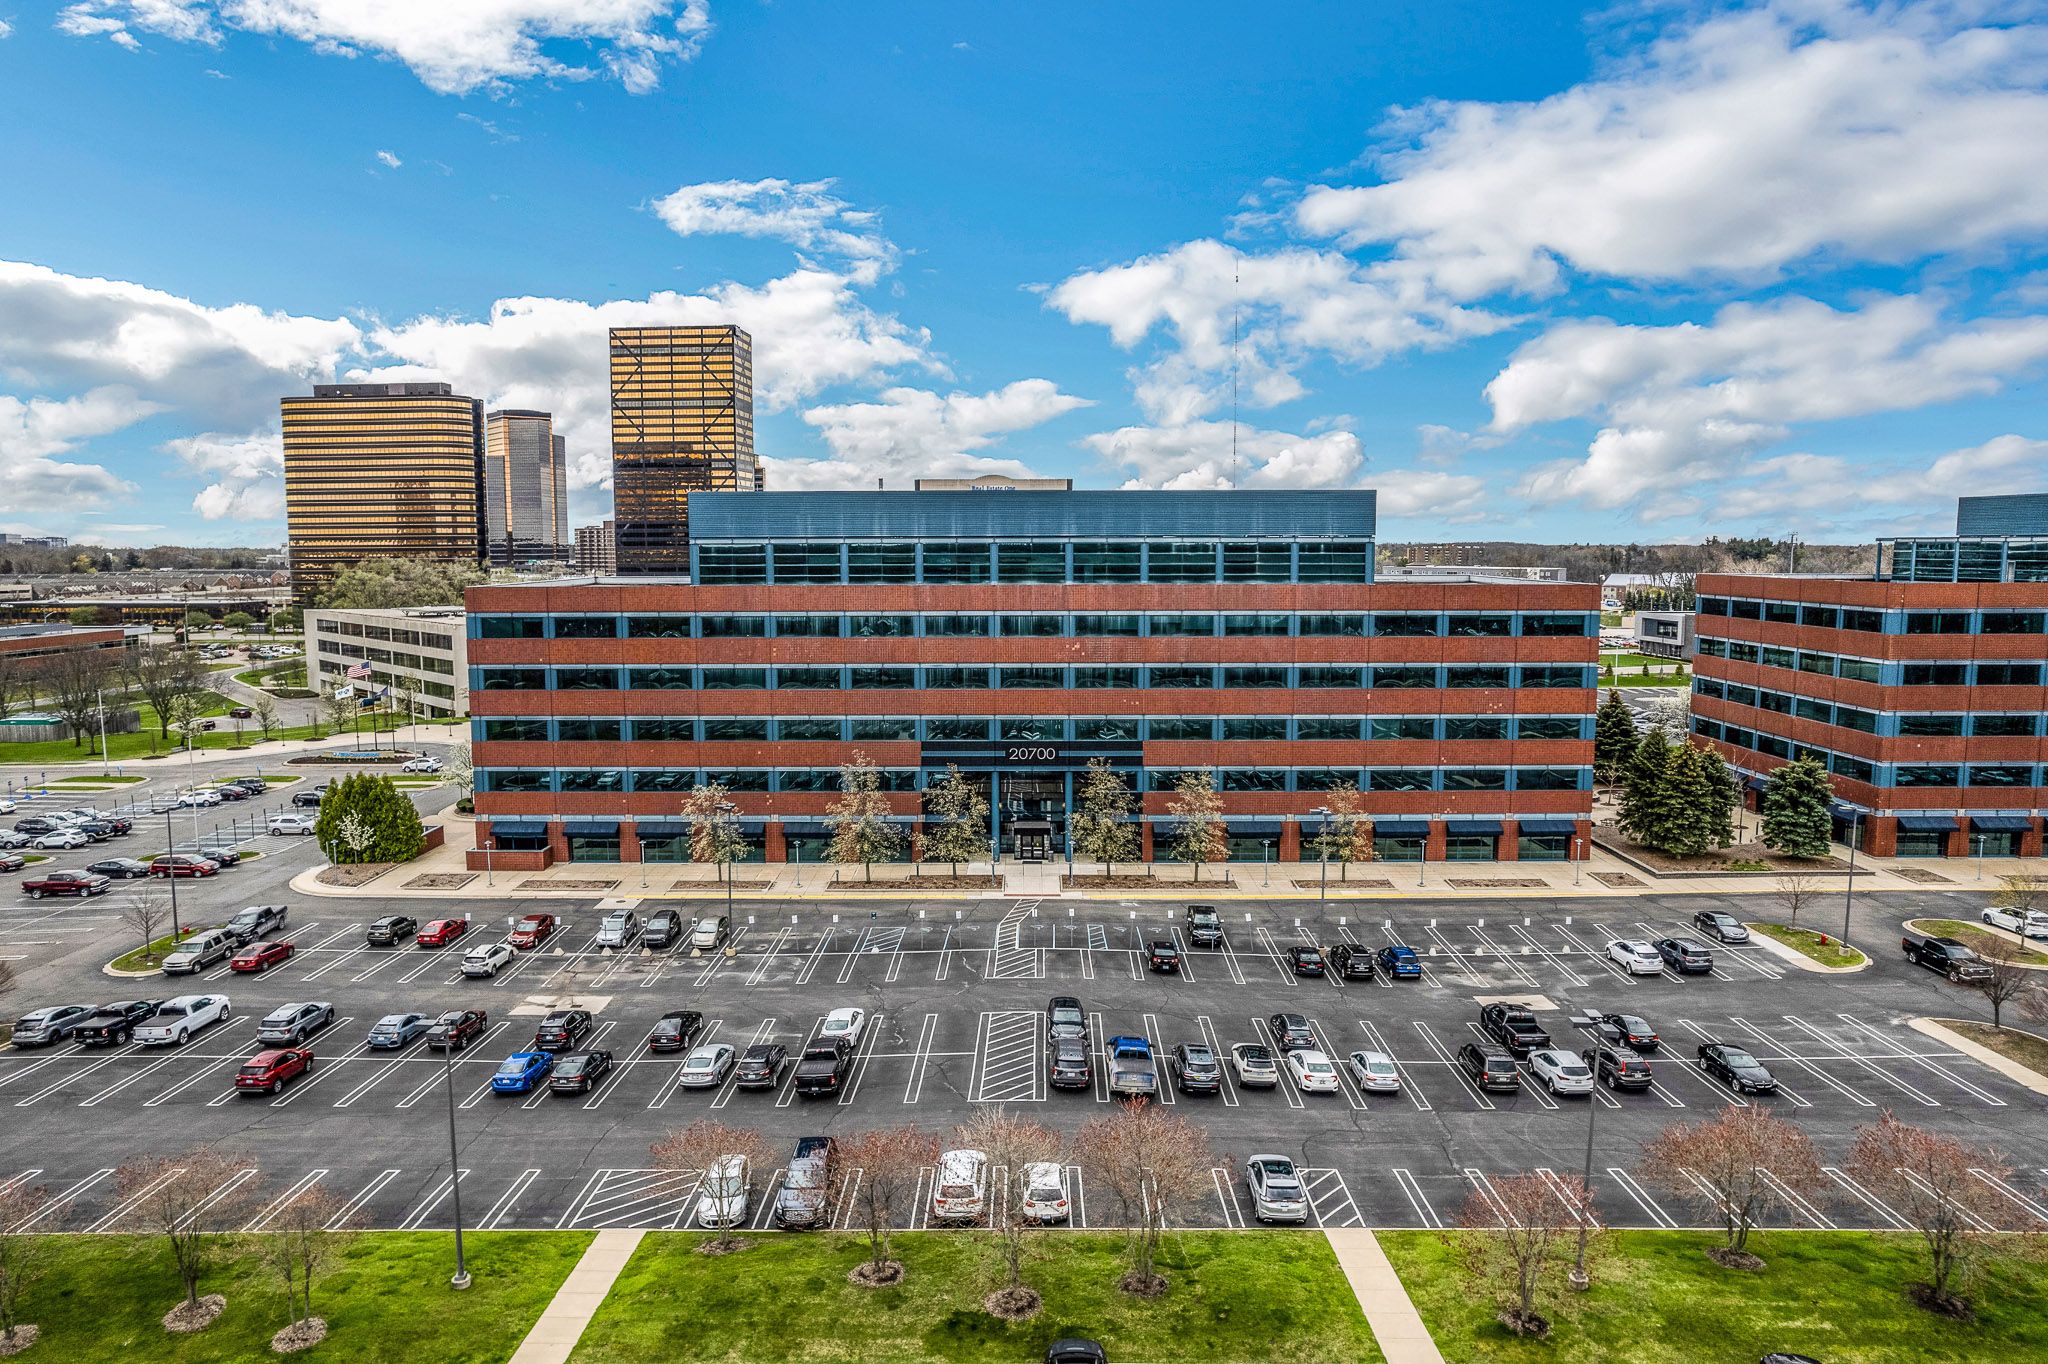 Commercial Real Estate Drone Photography